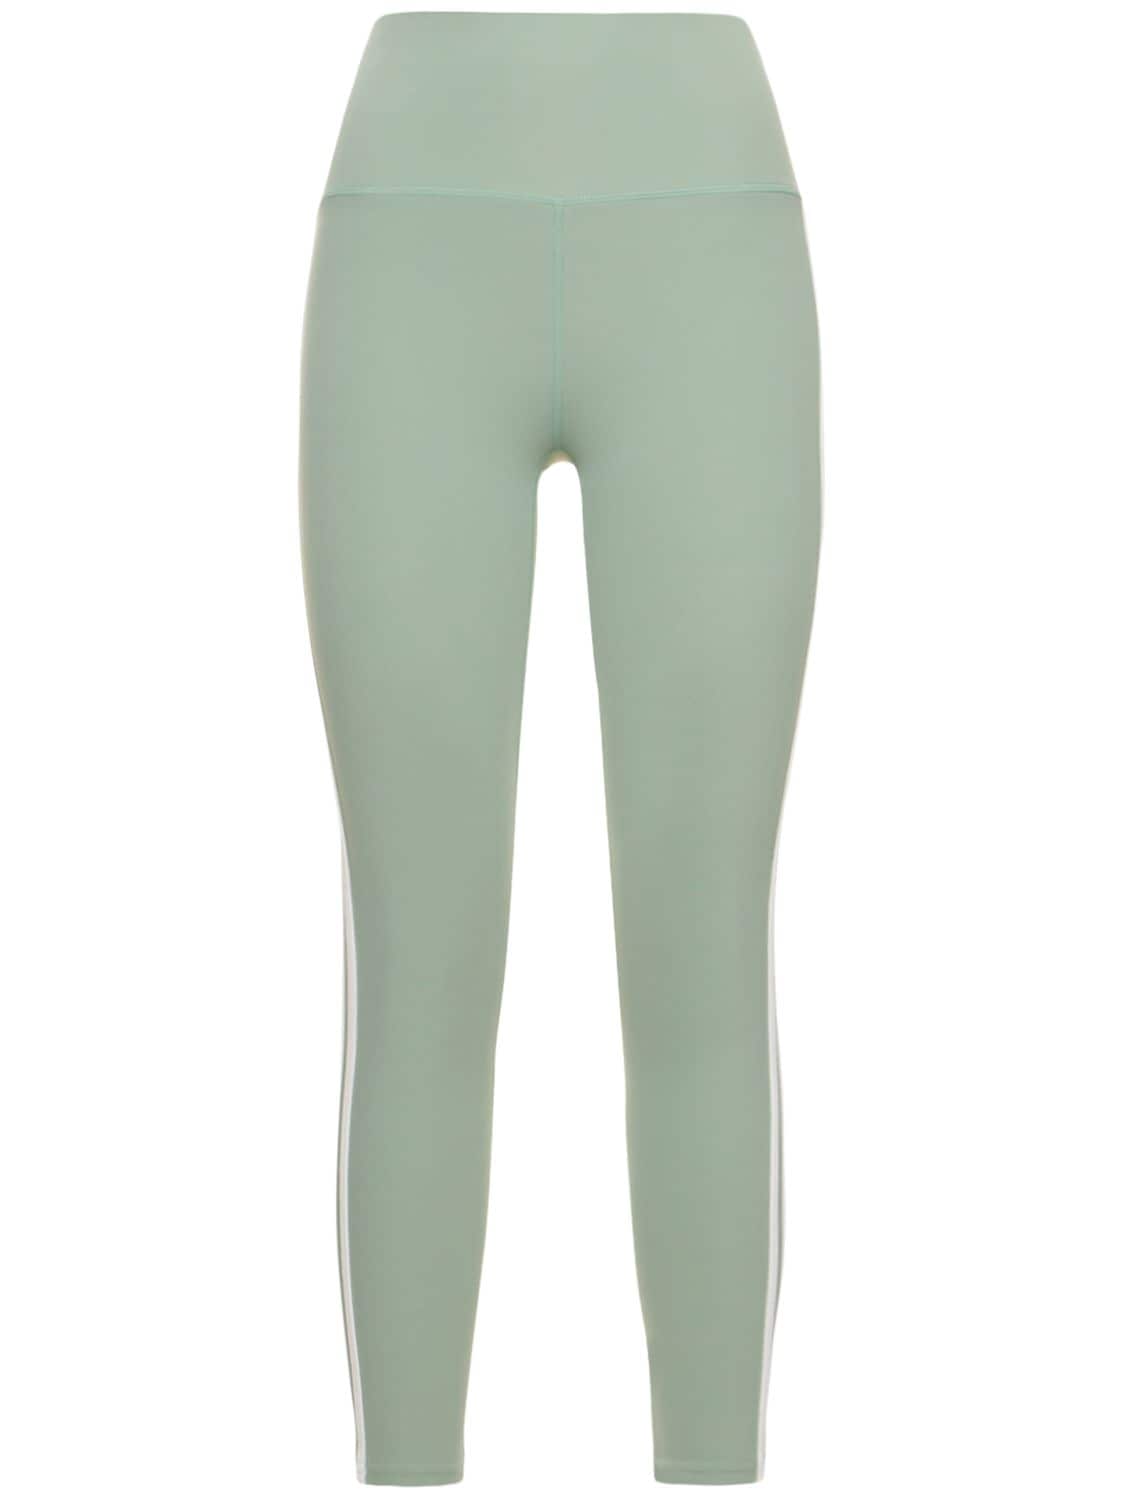 Splits59 Ella High Waisted Airweight 7/8 Legging In Olive, Women's At Urban Outfitters